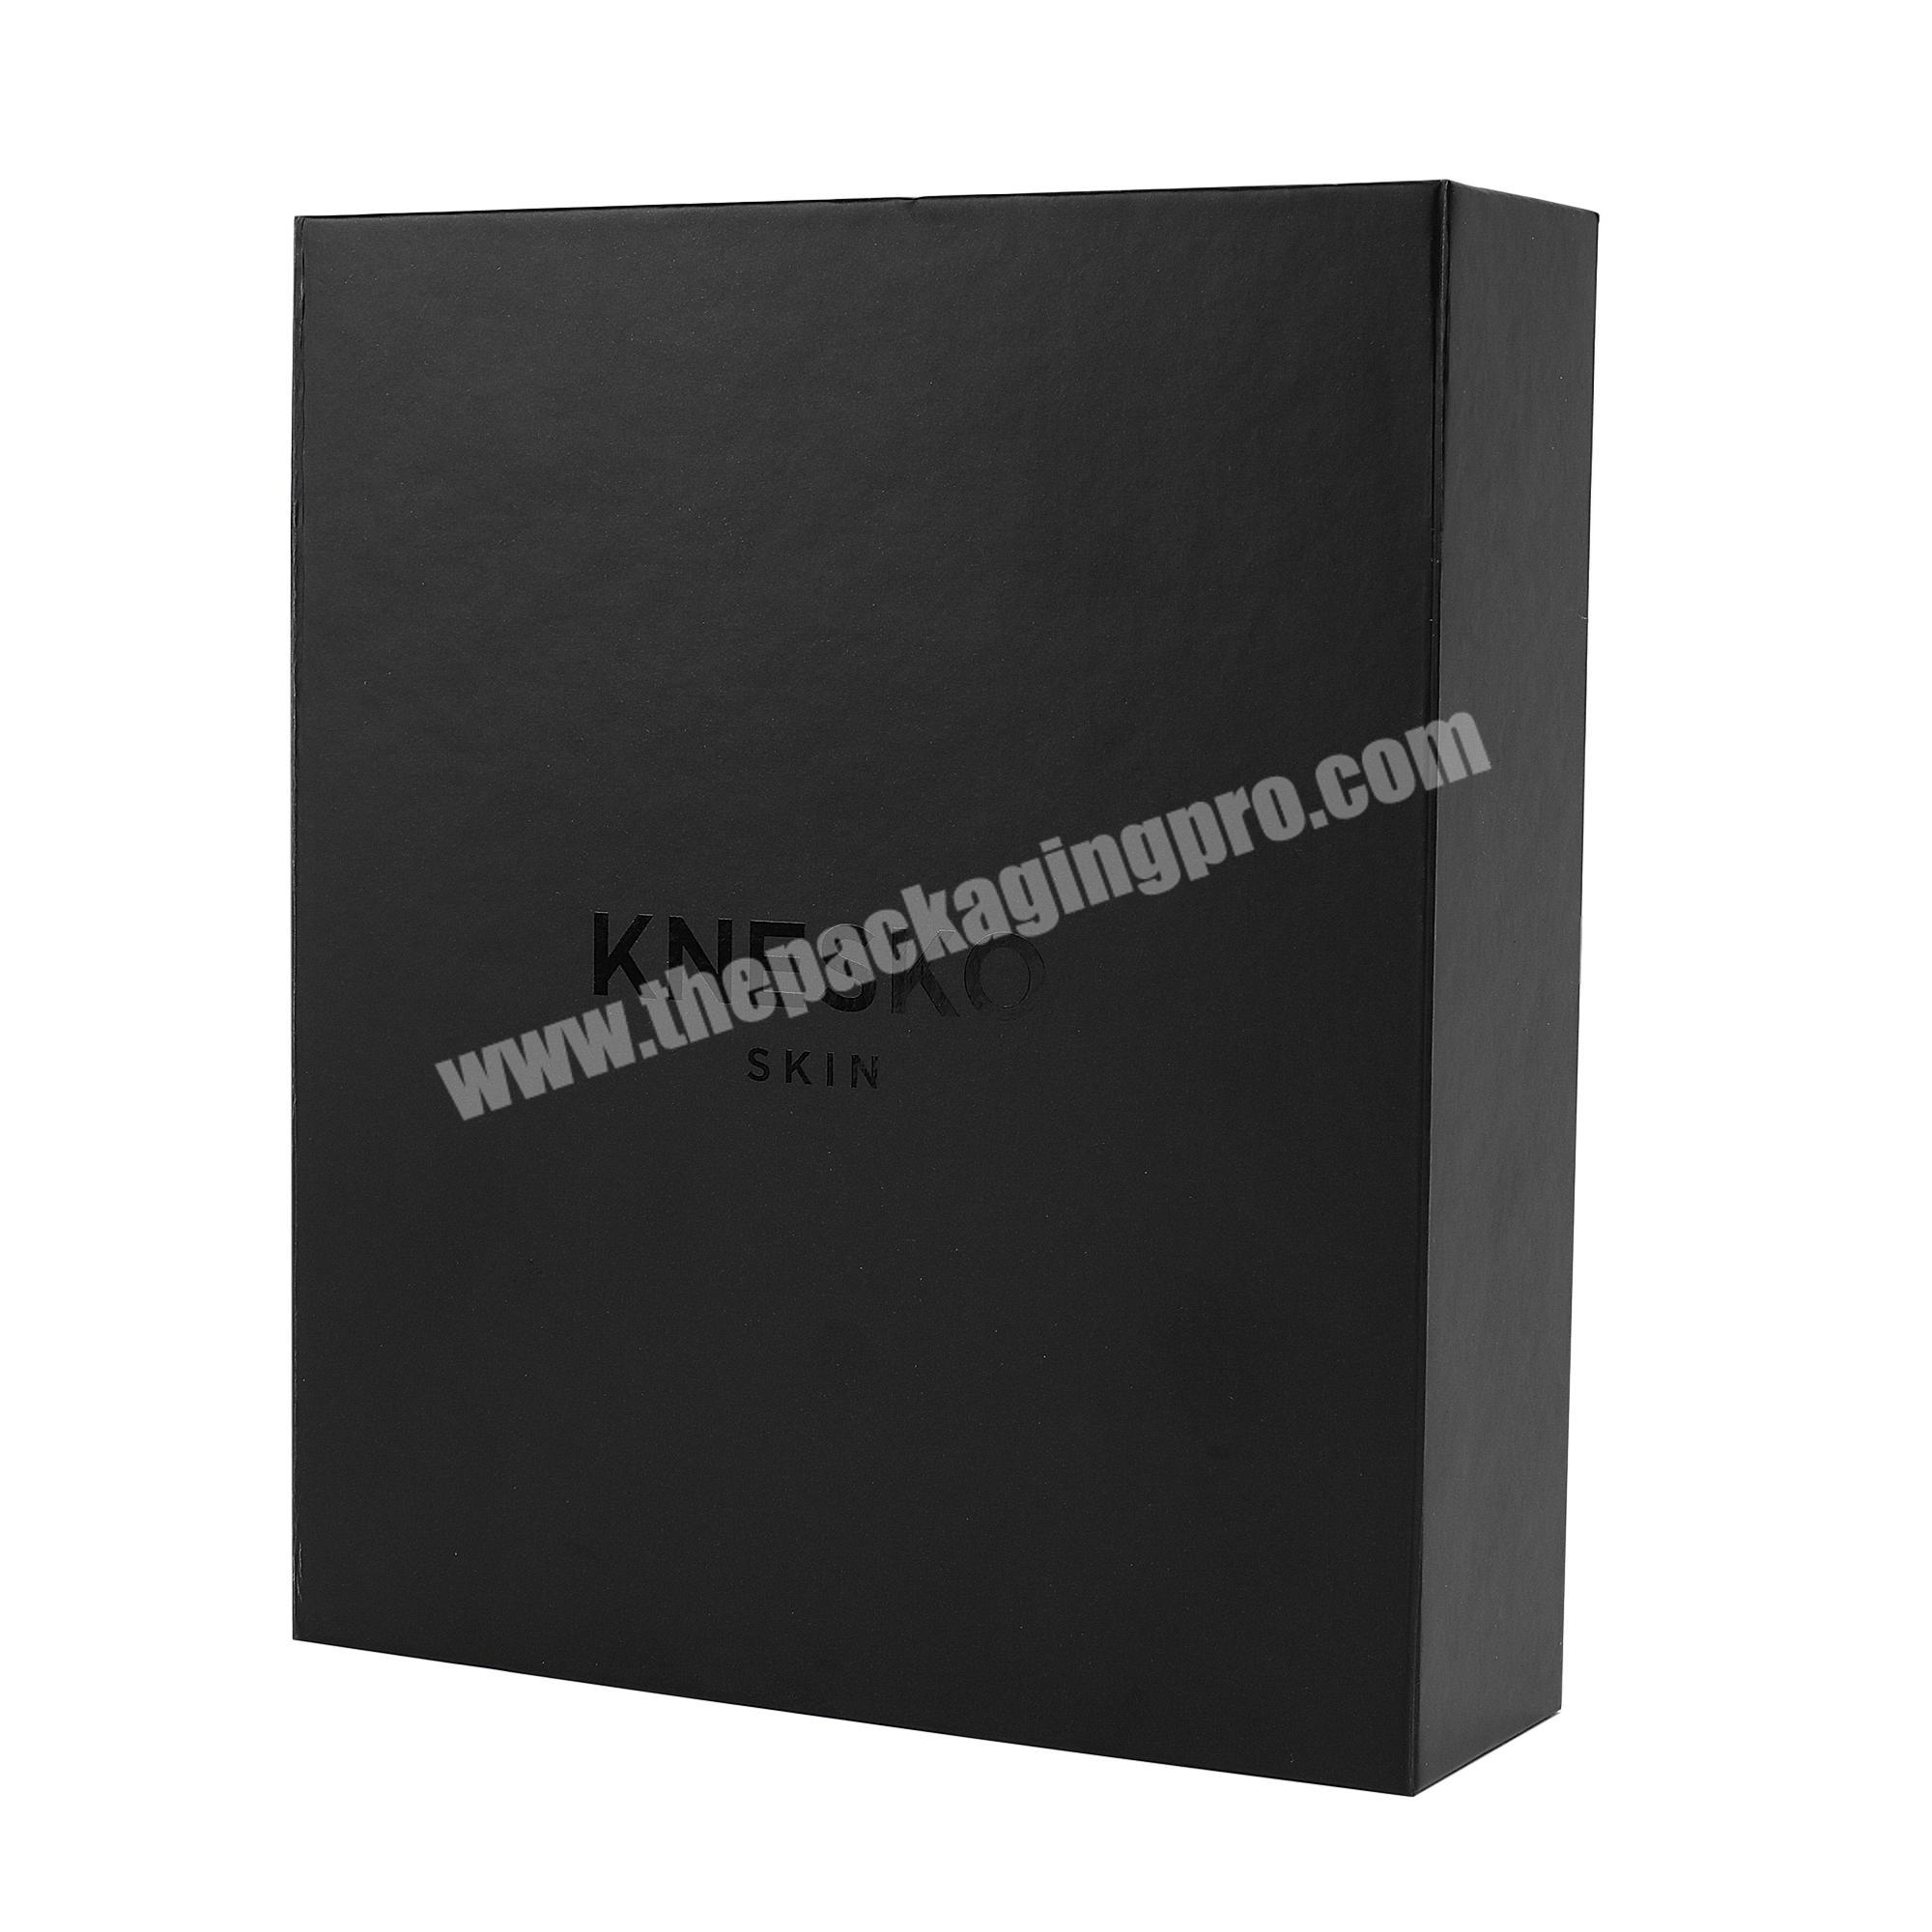 Black Printed Collapsible Rigid Cardboard Paper Storage Packaging Box With Magnets Flap For Cosmetics